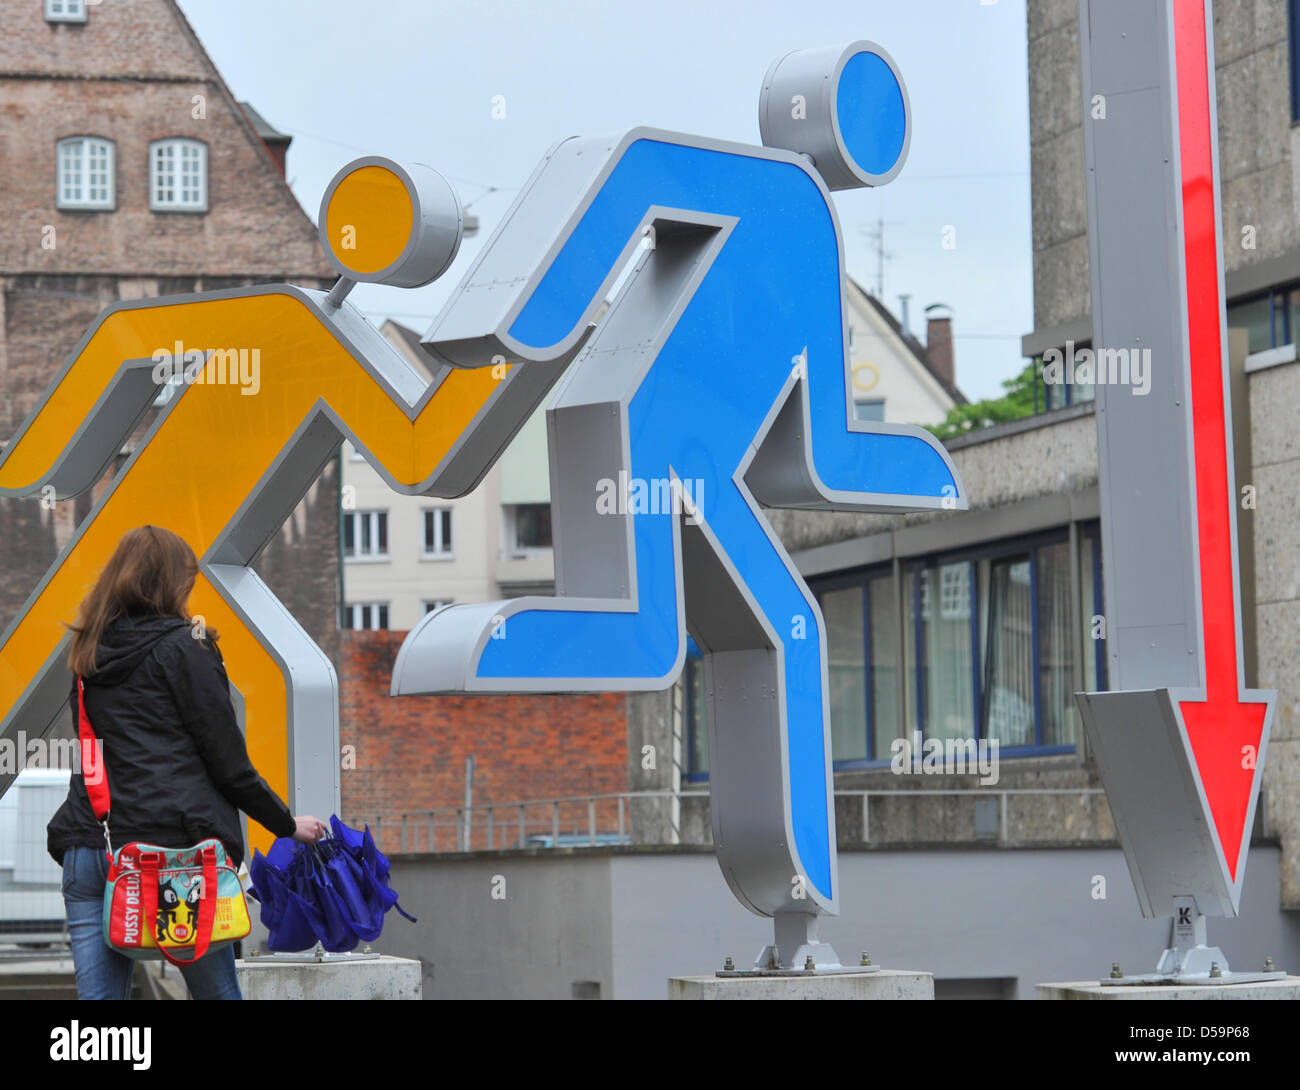 A woman passes by an overdimensional pictogram in Ulm, Germany, 17 June 2010. The pictograms were designed by Ottl Aicher of the Hochschule fuer Gestaltung (HfG), which is the Ulm School of Design. The HfG  was considered one of the leading schools of design in Germany until its closing in 1968. The former building of the HfG is now intended to become a centre for design. Photo: St Stock Photo